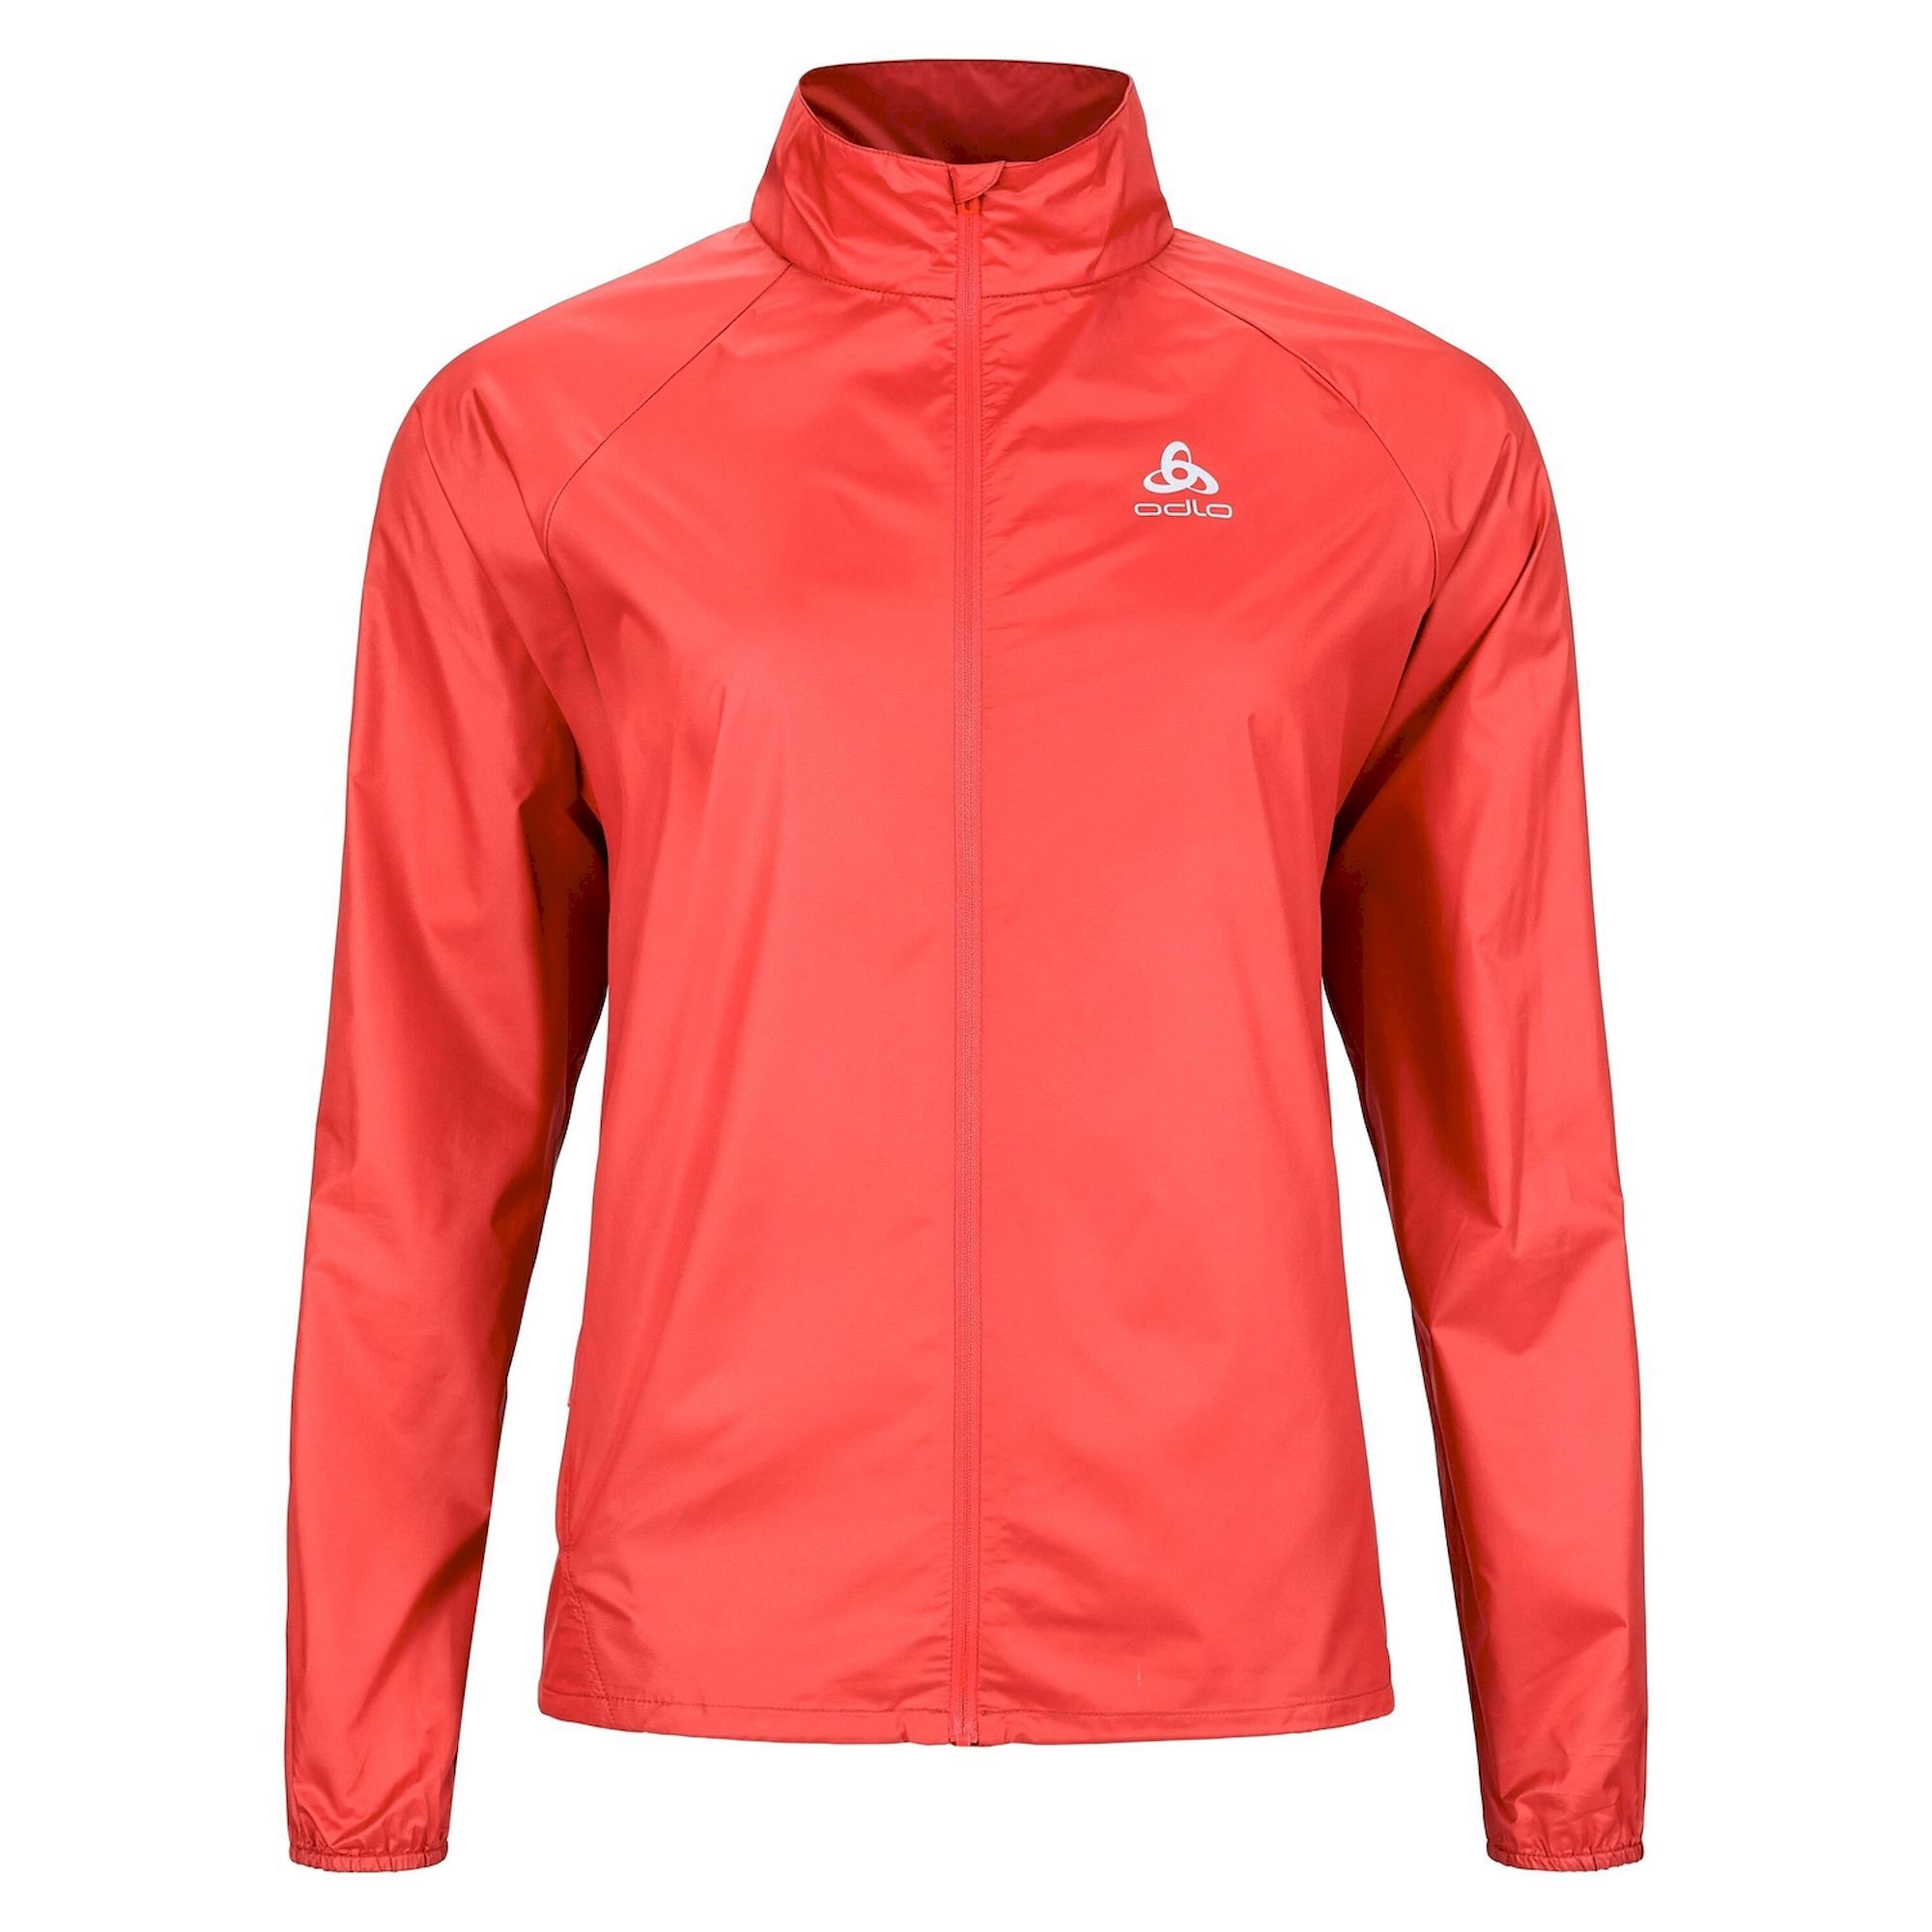 Odlo Zeroweight Jacket - Giacca a vento - Donna | Hardloop